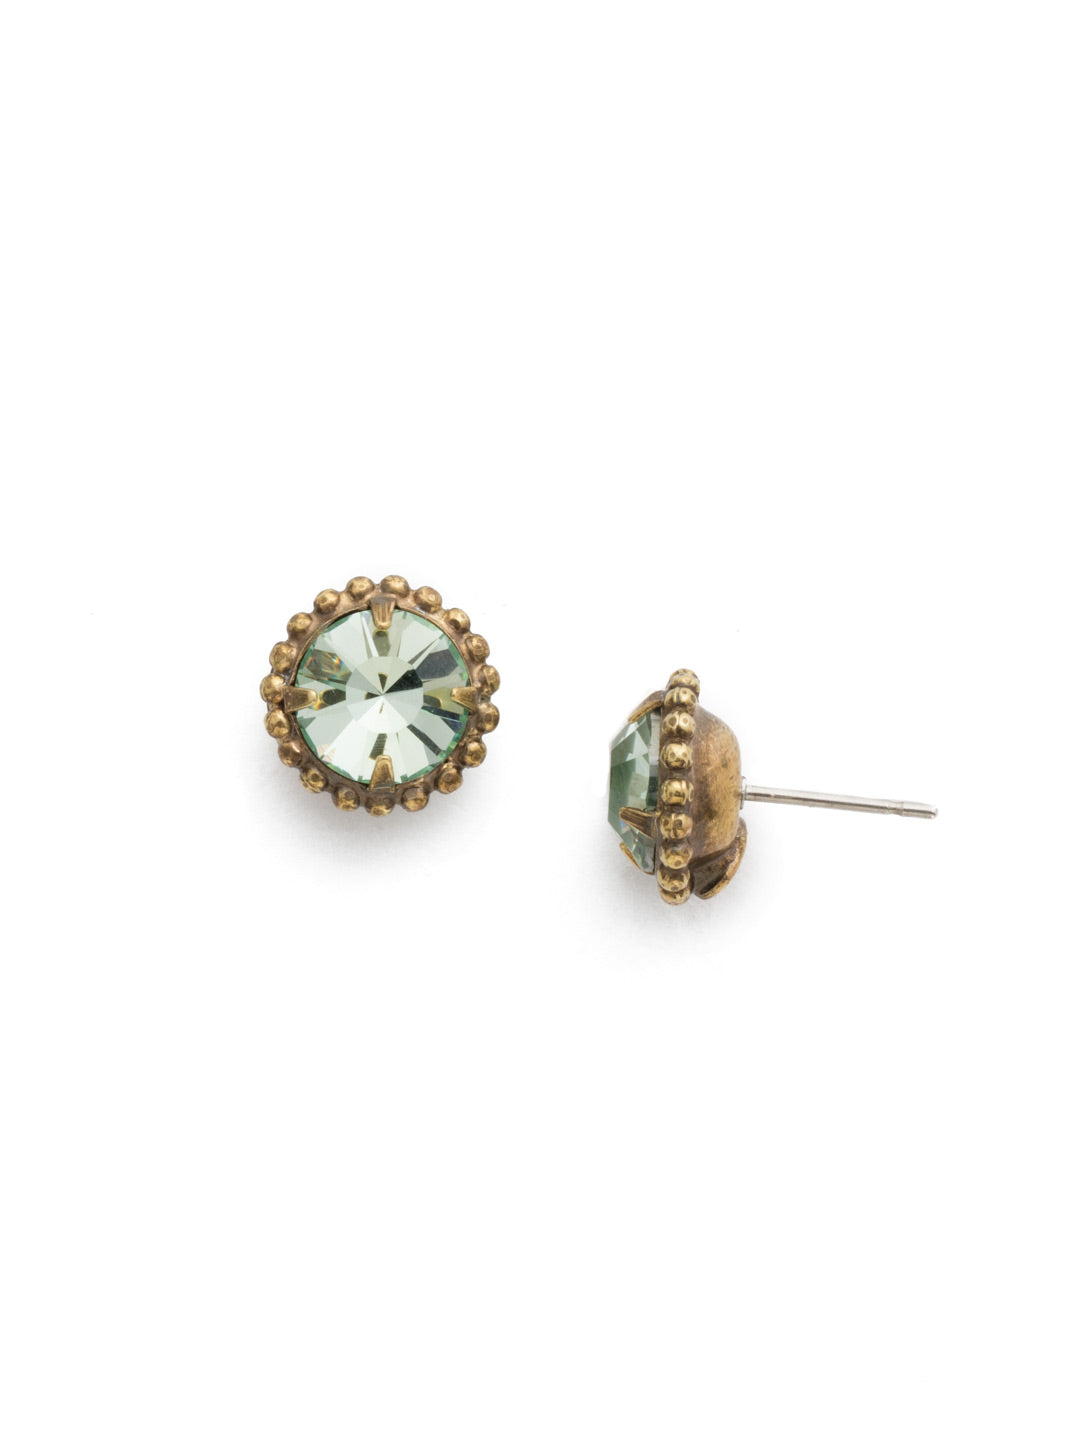 Simplicity Stud Earrings - EBY38AGMIN - <p>A timeless classic, the Simplicity Stud Earrings feature round cut crystals in a variety of colors; accented with a halo of metal beaded detail. Need help picking a stud? <a href="https://www.sorrelli.com/blogs/sisterhood/round-stud-earrings-101-a-rundown-of-sizes-styles-and-sparkle">Check out our size guide!</a> From Sorrelli's Mint collection in our Antique Gold-tone finish.</p>